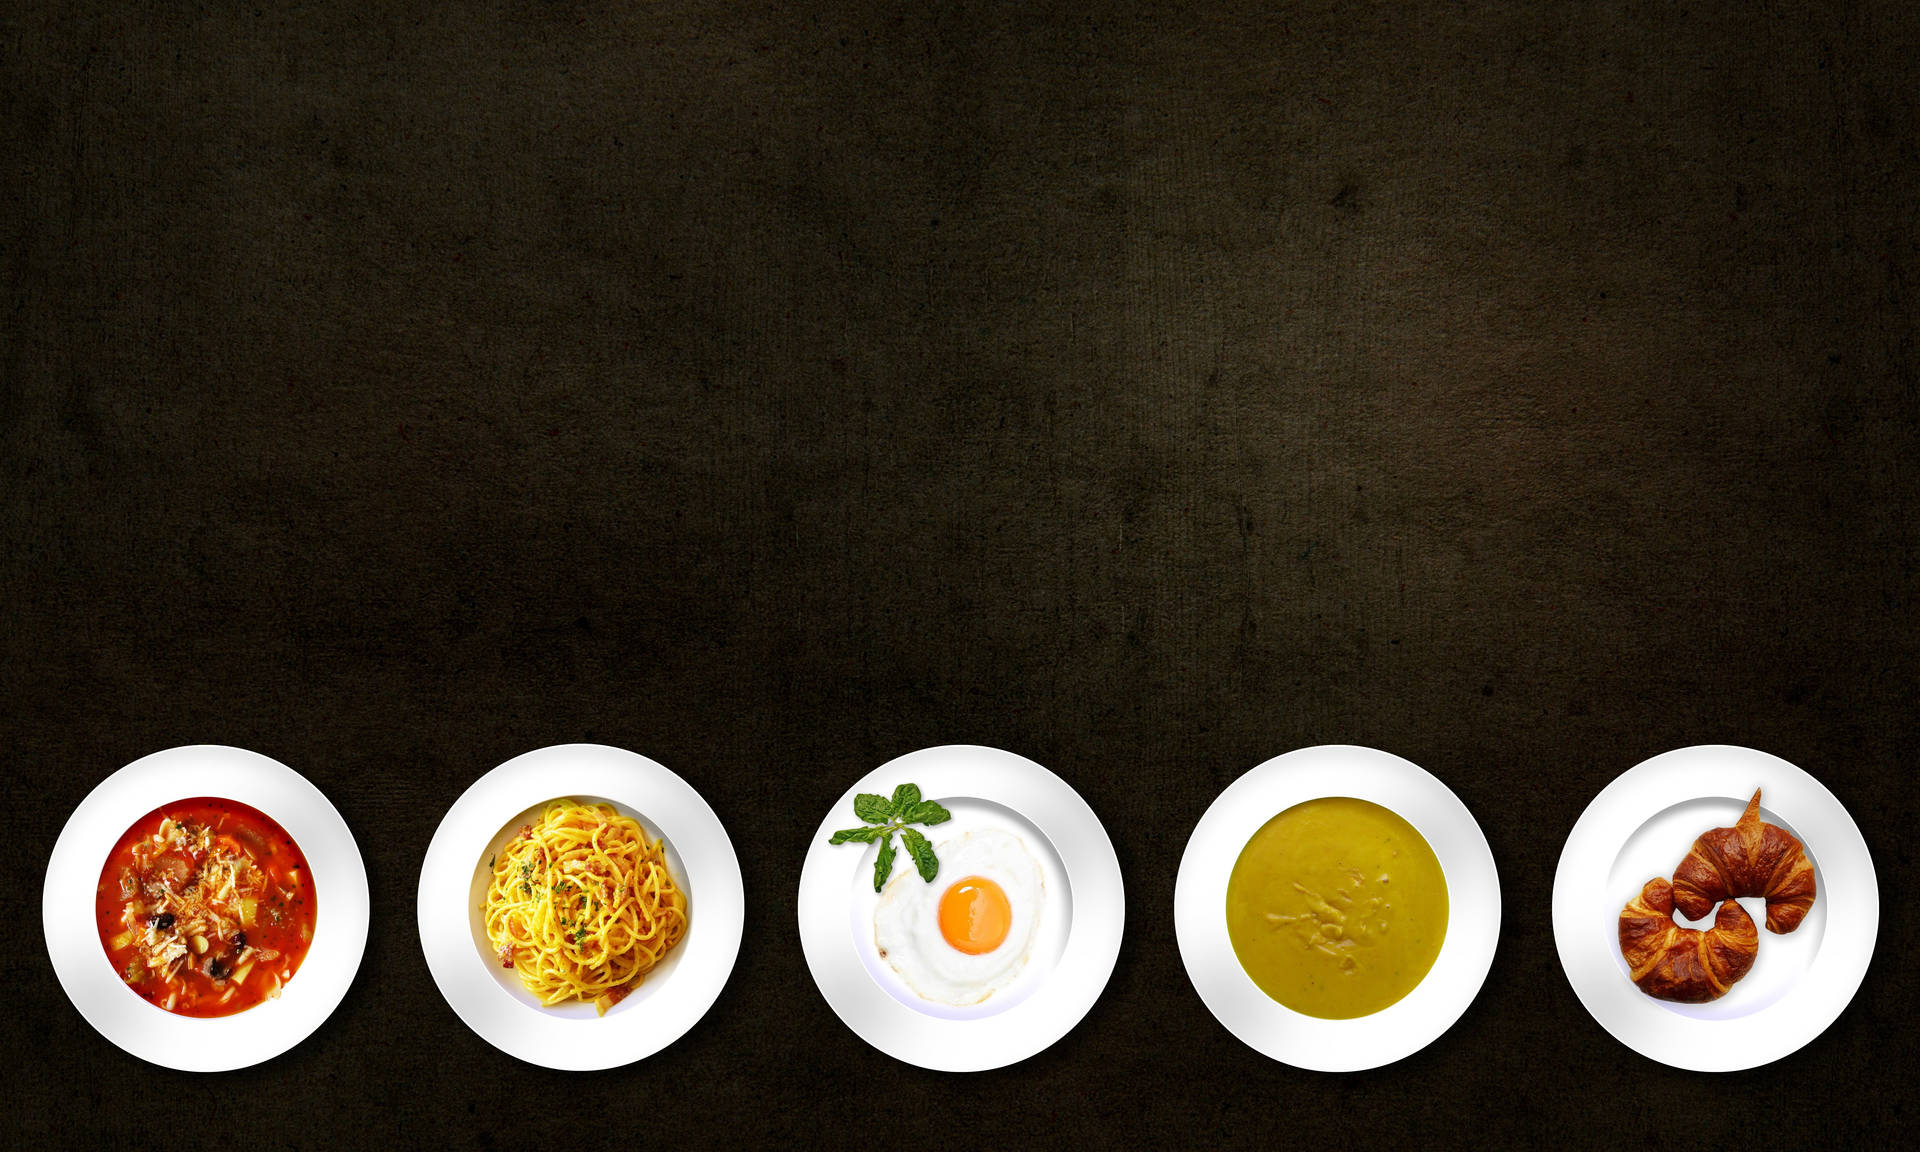 A feast for the eyes - Five assorted plates of delectable cuisine. Wallpaper